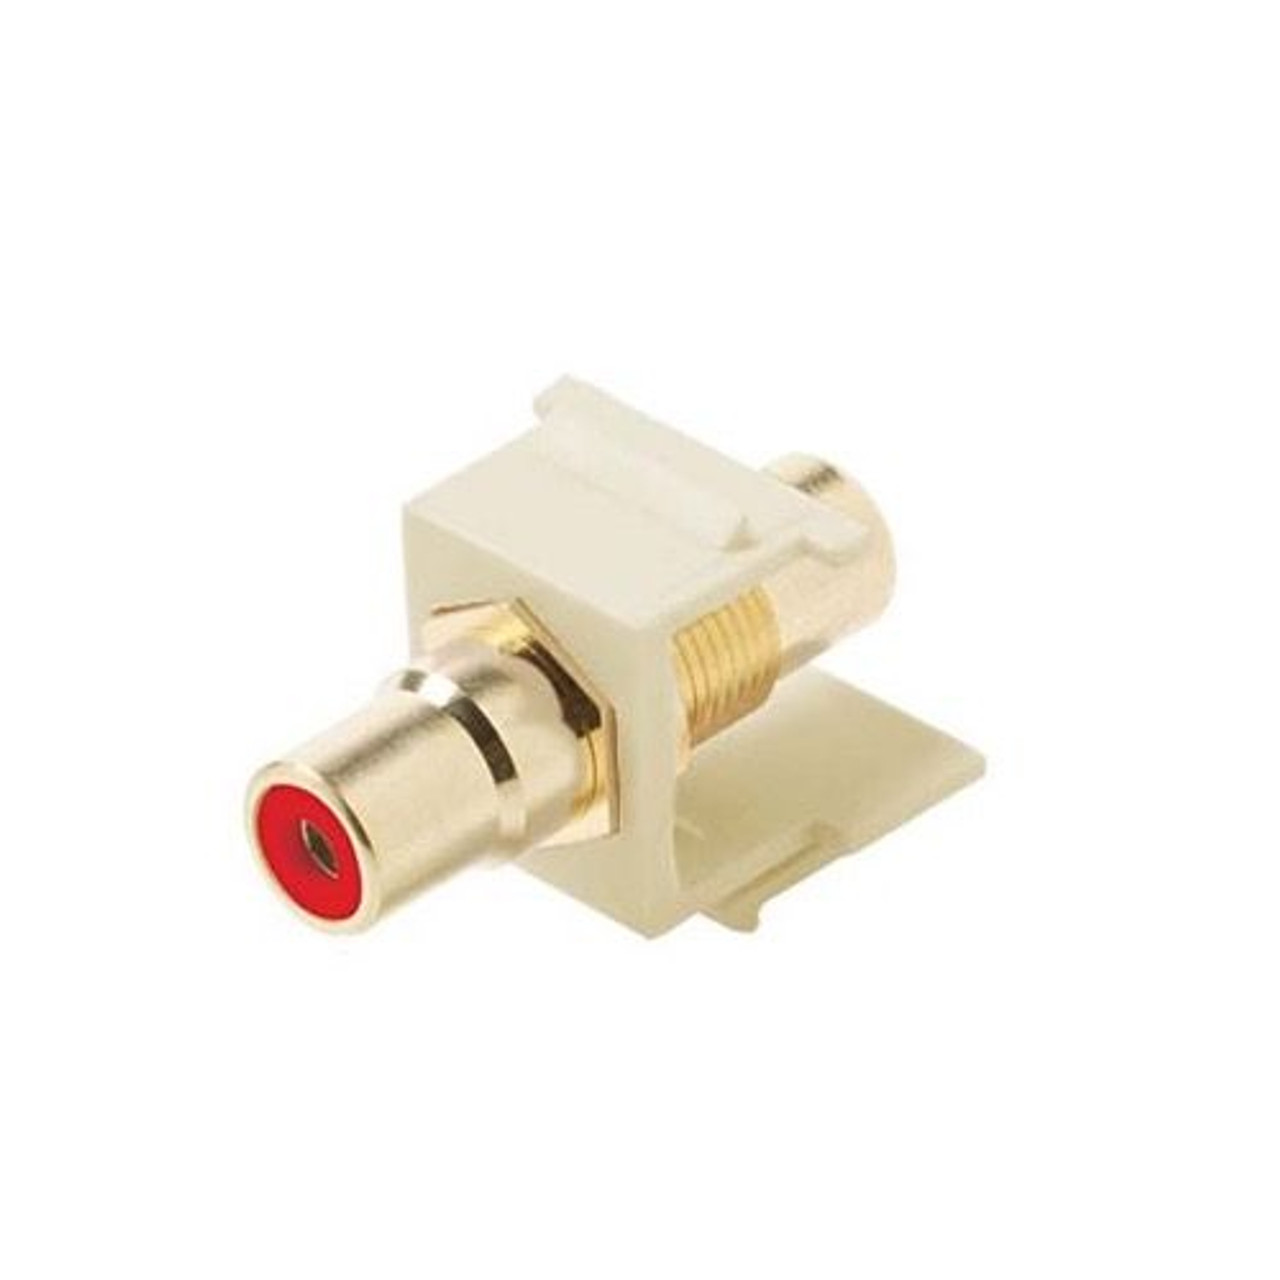 Steren 310-461AL RCA Jack Keystone Insert Almond with RED Band Gold Plate Female to Female QuickPort Audio Video Snap-In, Wall Plate Snap-In Data Junction Component Connection, Part # 310461-AL